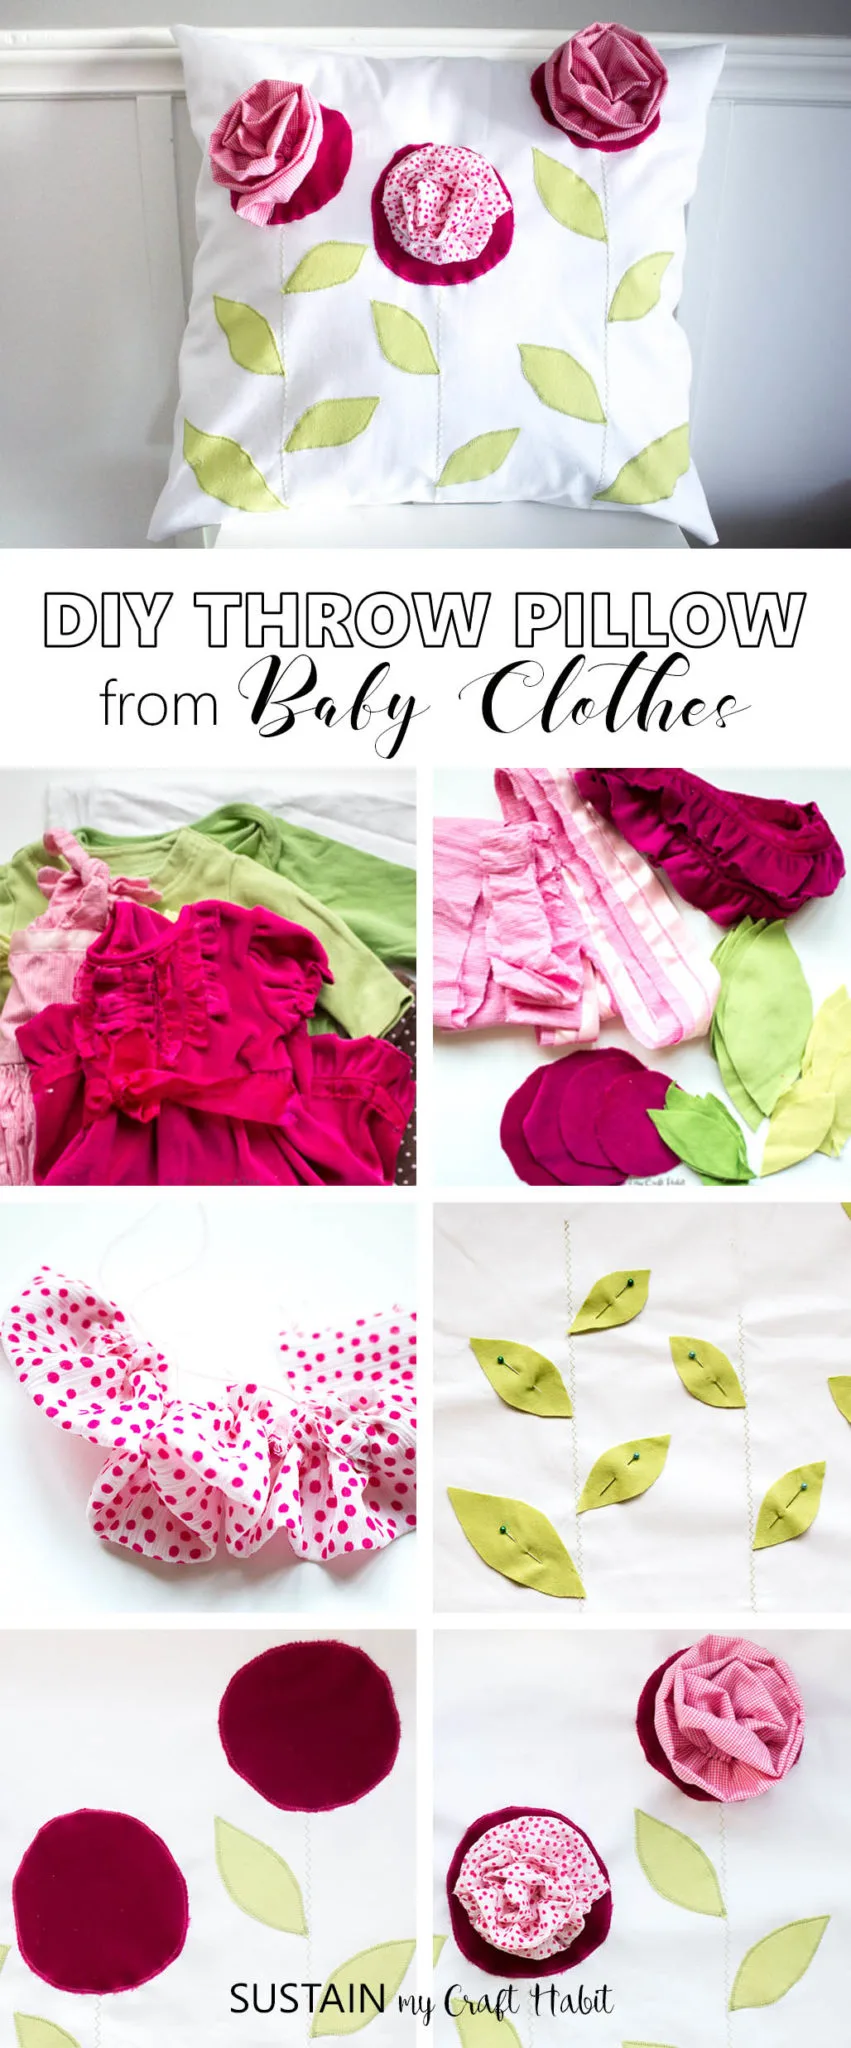 DIY throw pillow upcycled from outgrown baby clothing. This beautiful and bright home decor ideas would make a lovely keepsake or gift. Click through for the full tutorial and pattern.